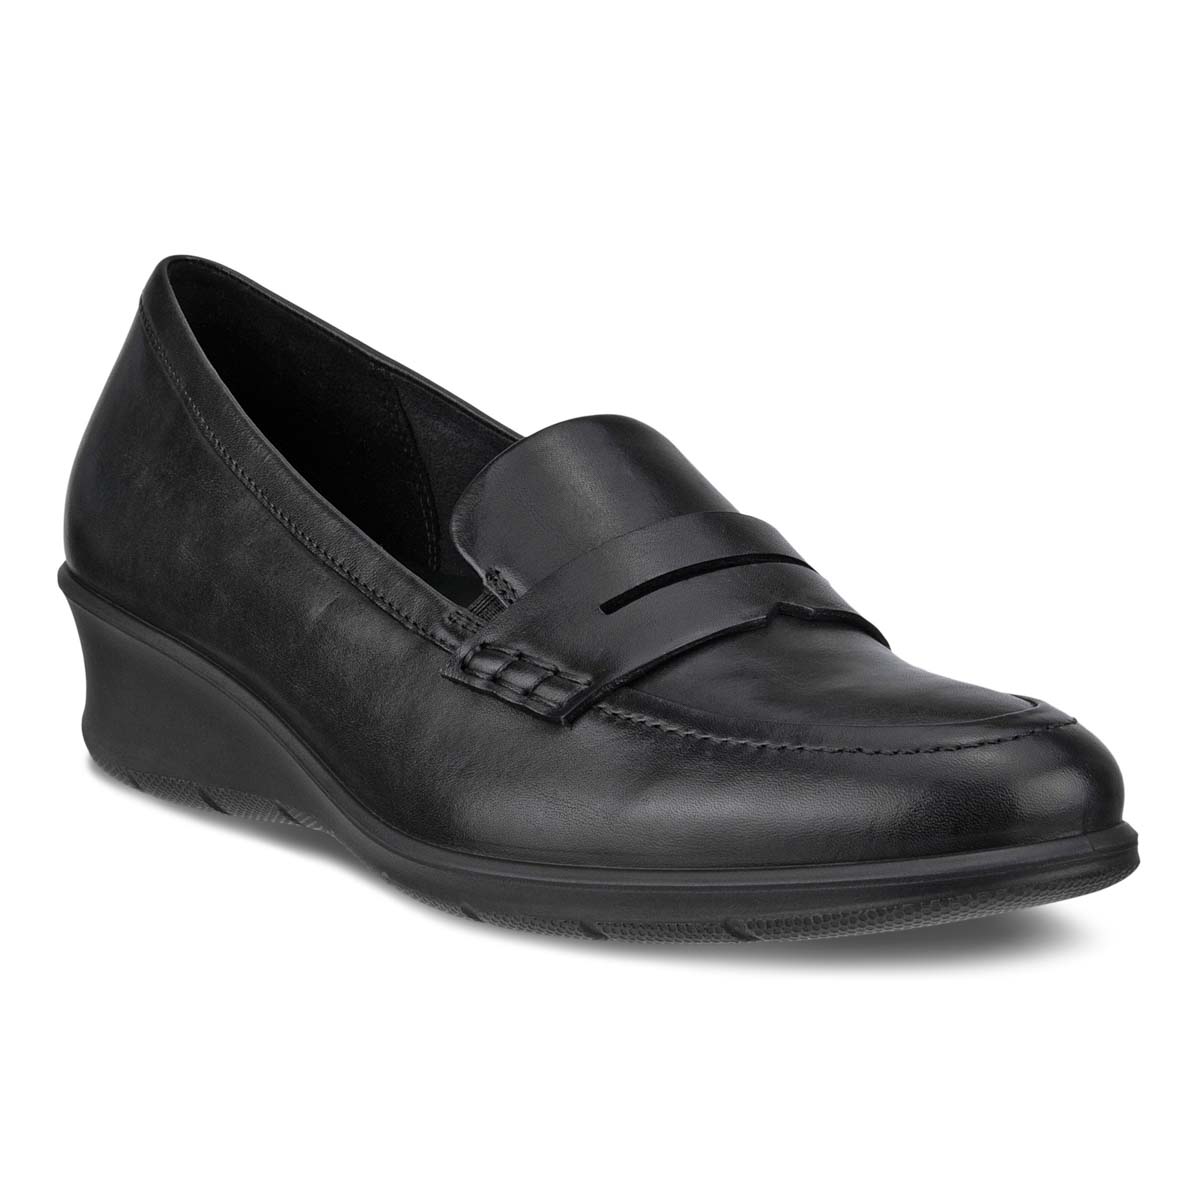 Ecco Felicia Loafer Black Leather Womens Comfort Slip On Shoes 217323-01001 In Size 38 In Plain Black Leather